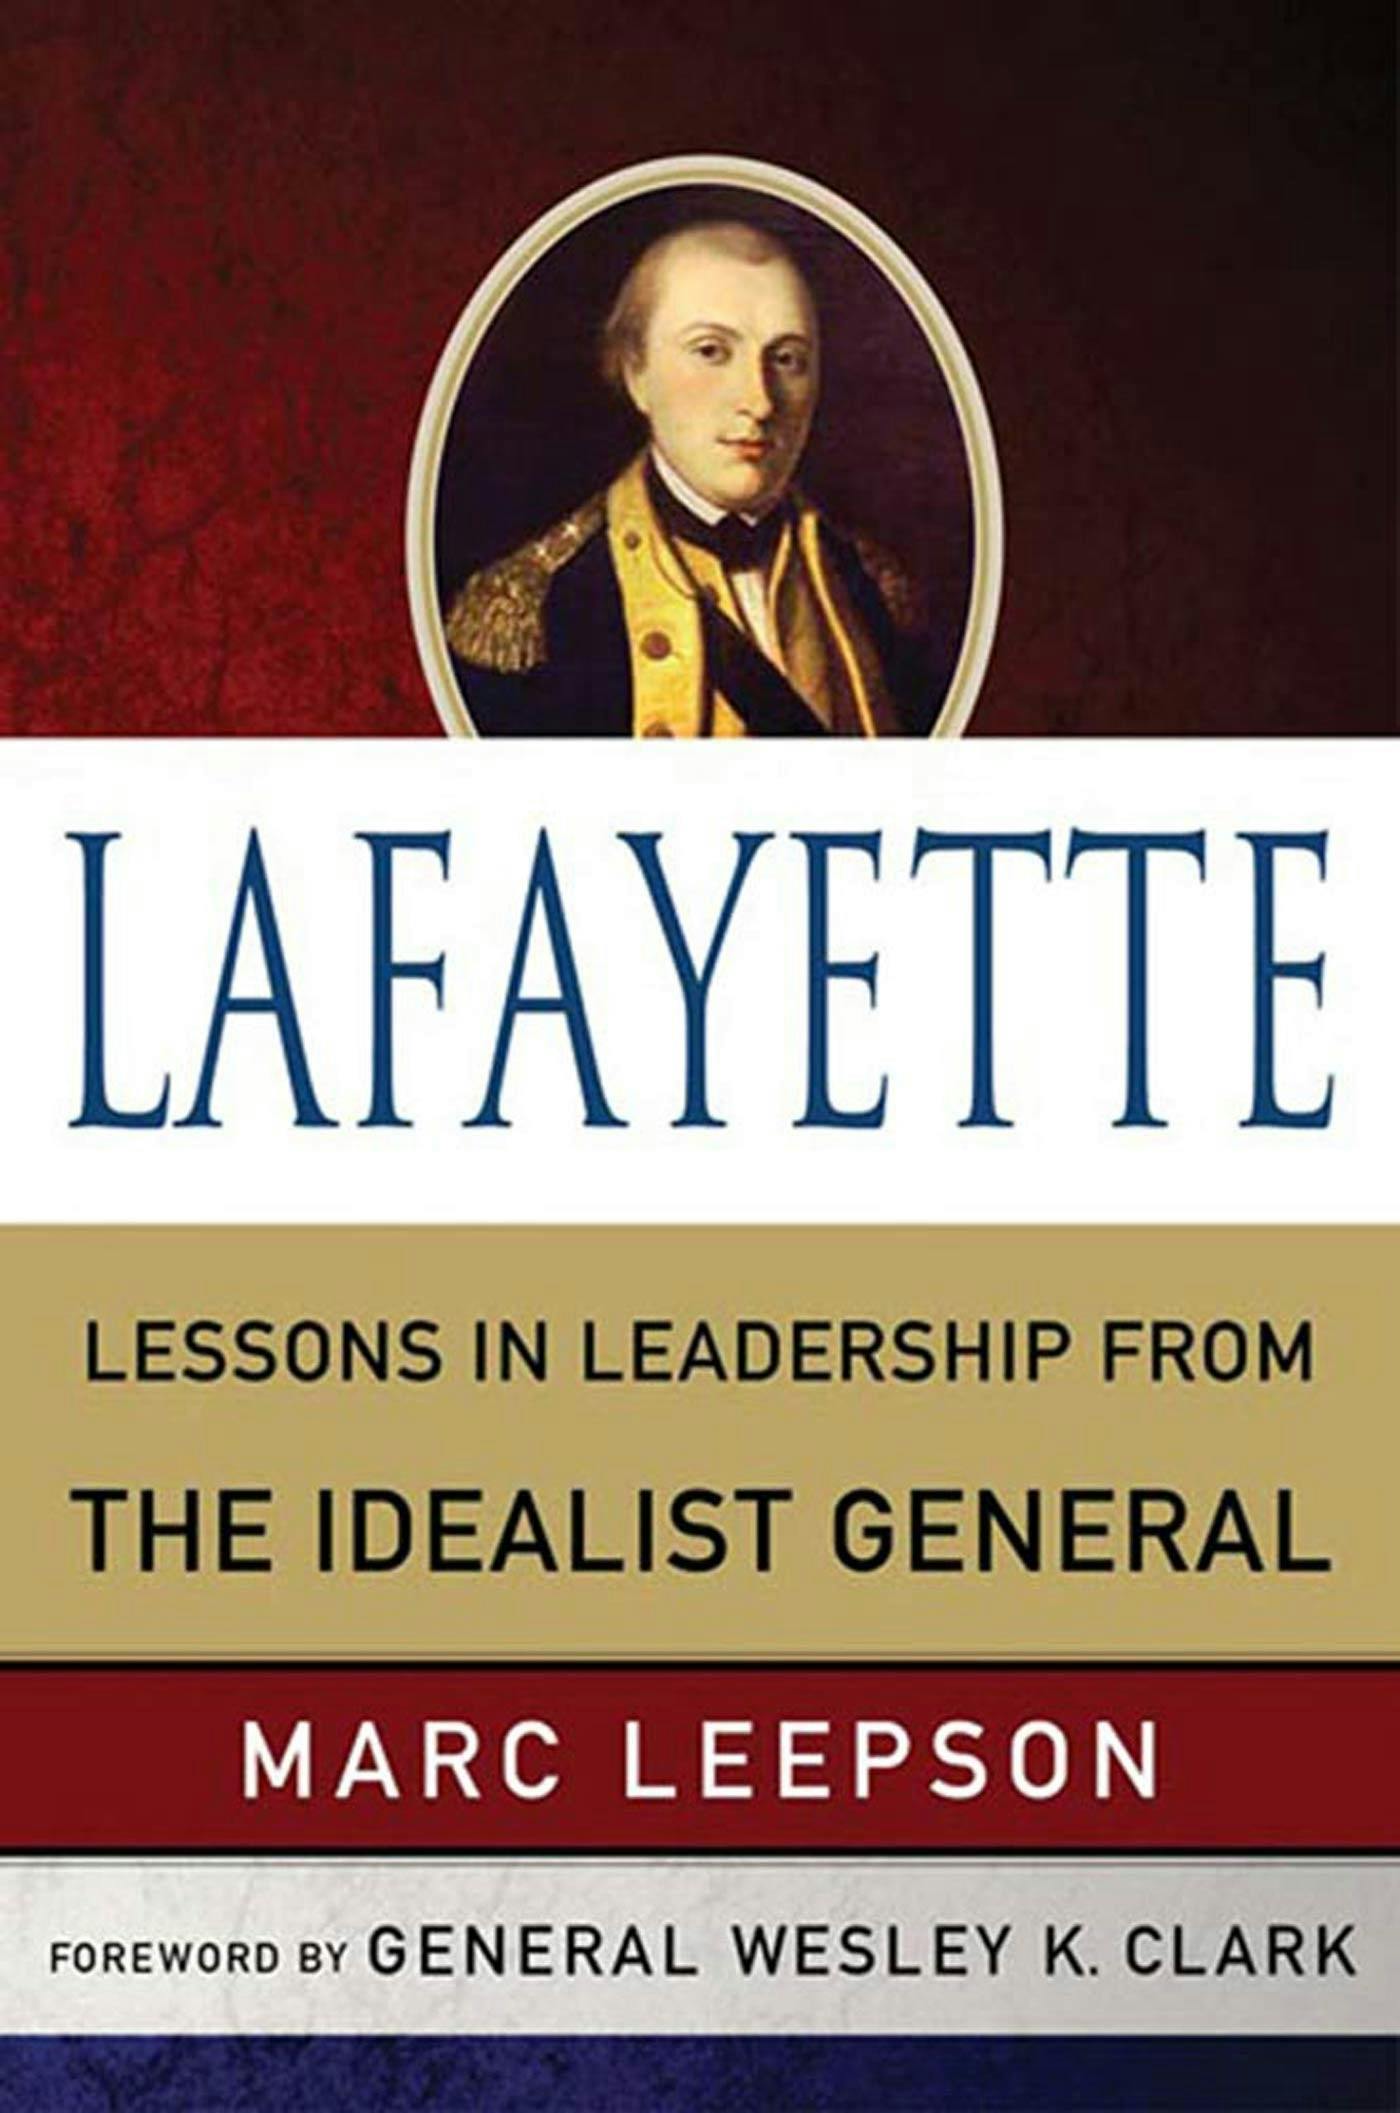 Lafayette: Lessons in Leadership from the Idealist General